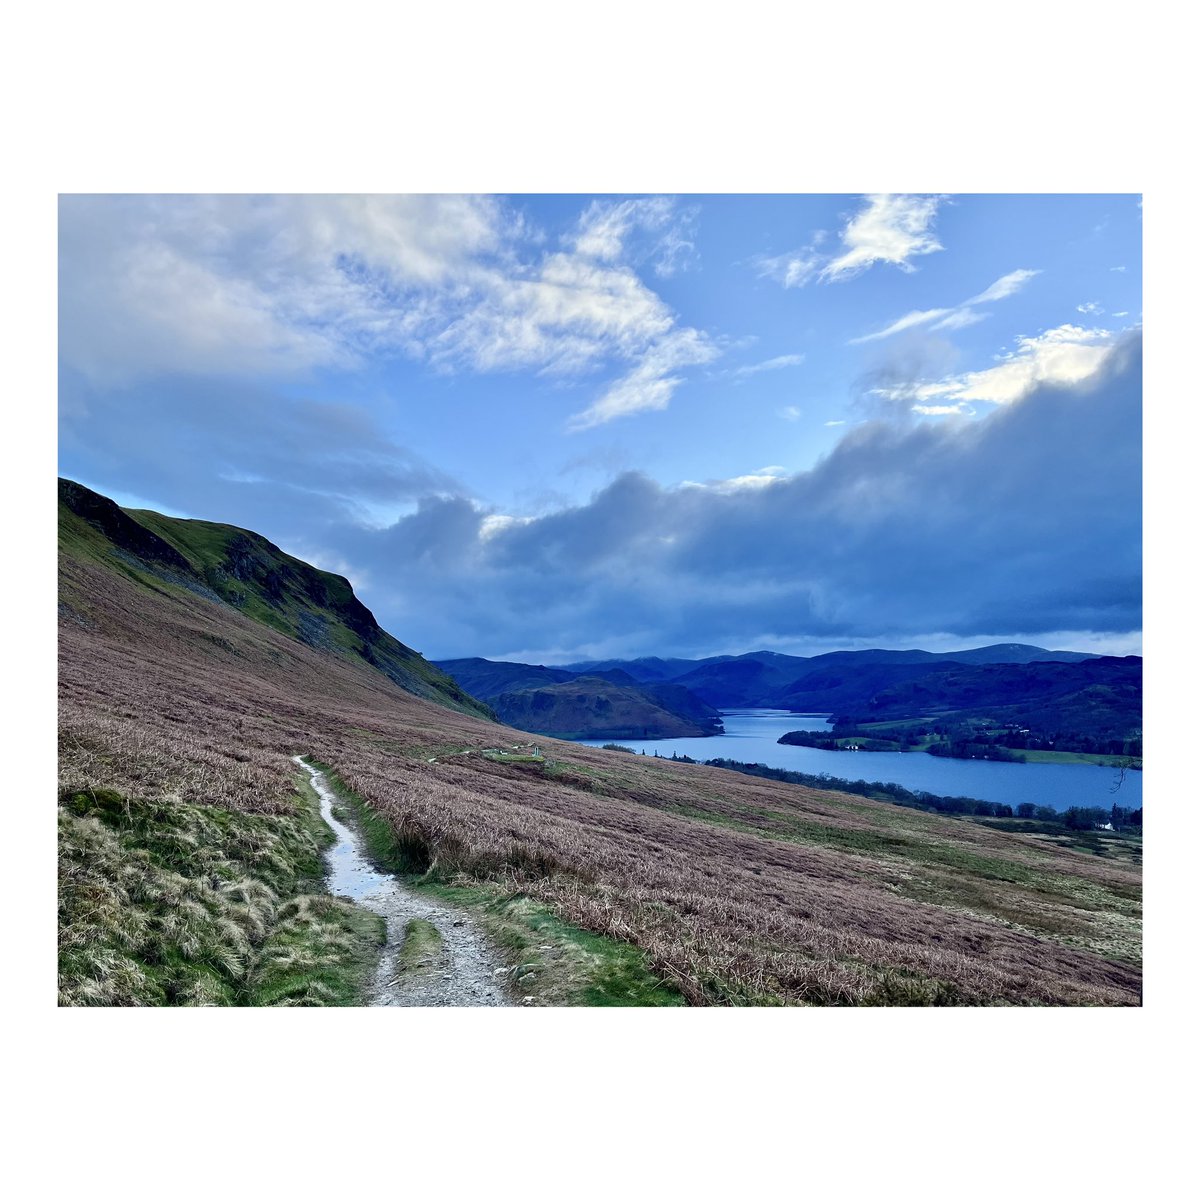 Myself & @Cheryl_B79 made the trip back up to the wonderful @thequietsite for an Easter weekend getaway. It’s great location for some cracking riding in the Lakes. Especially around #ullswaterlake!👌🏻 Day 1 was rain with a bit more rain just to be sure! 🙄 #goodvibesandbikerides